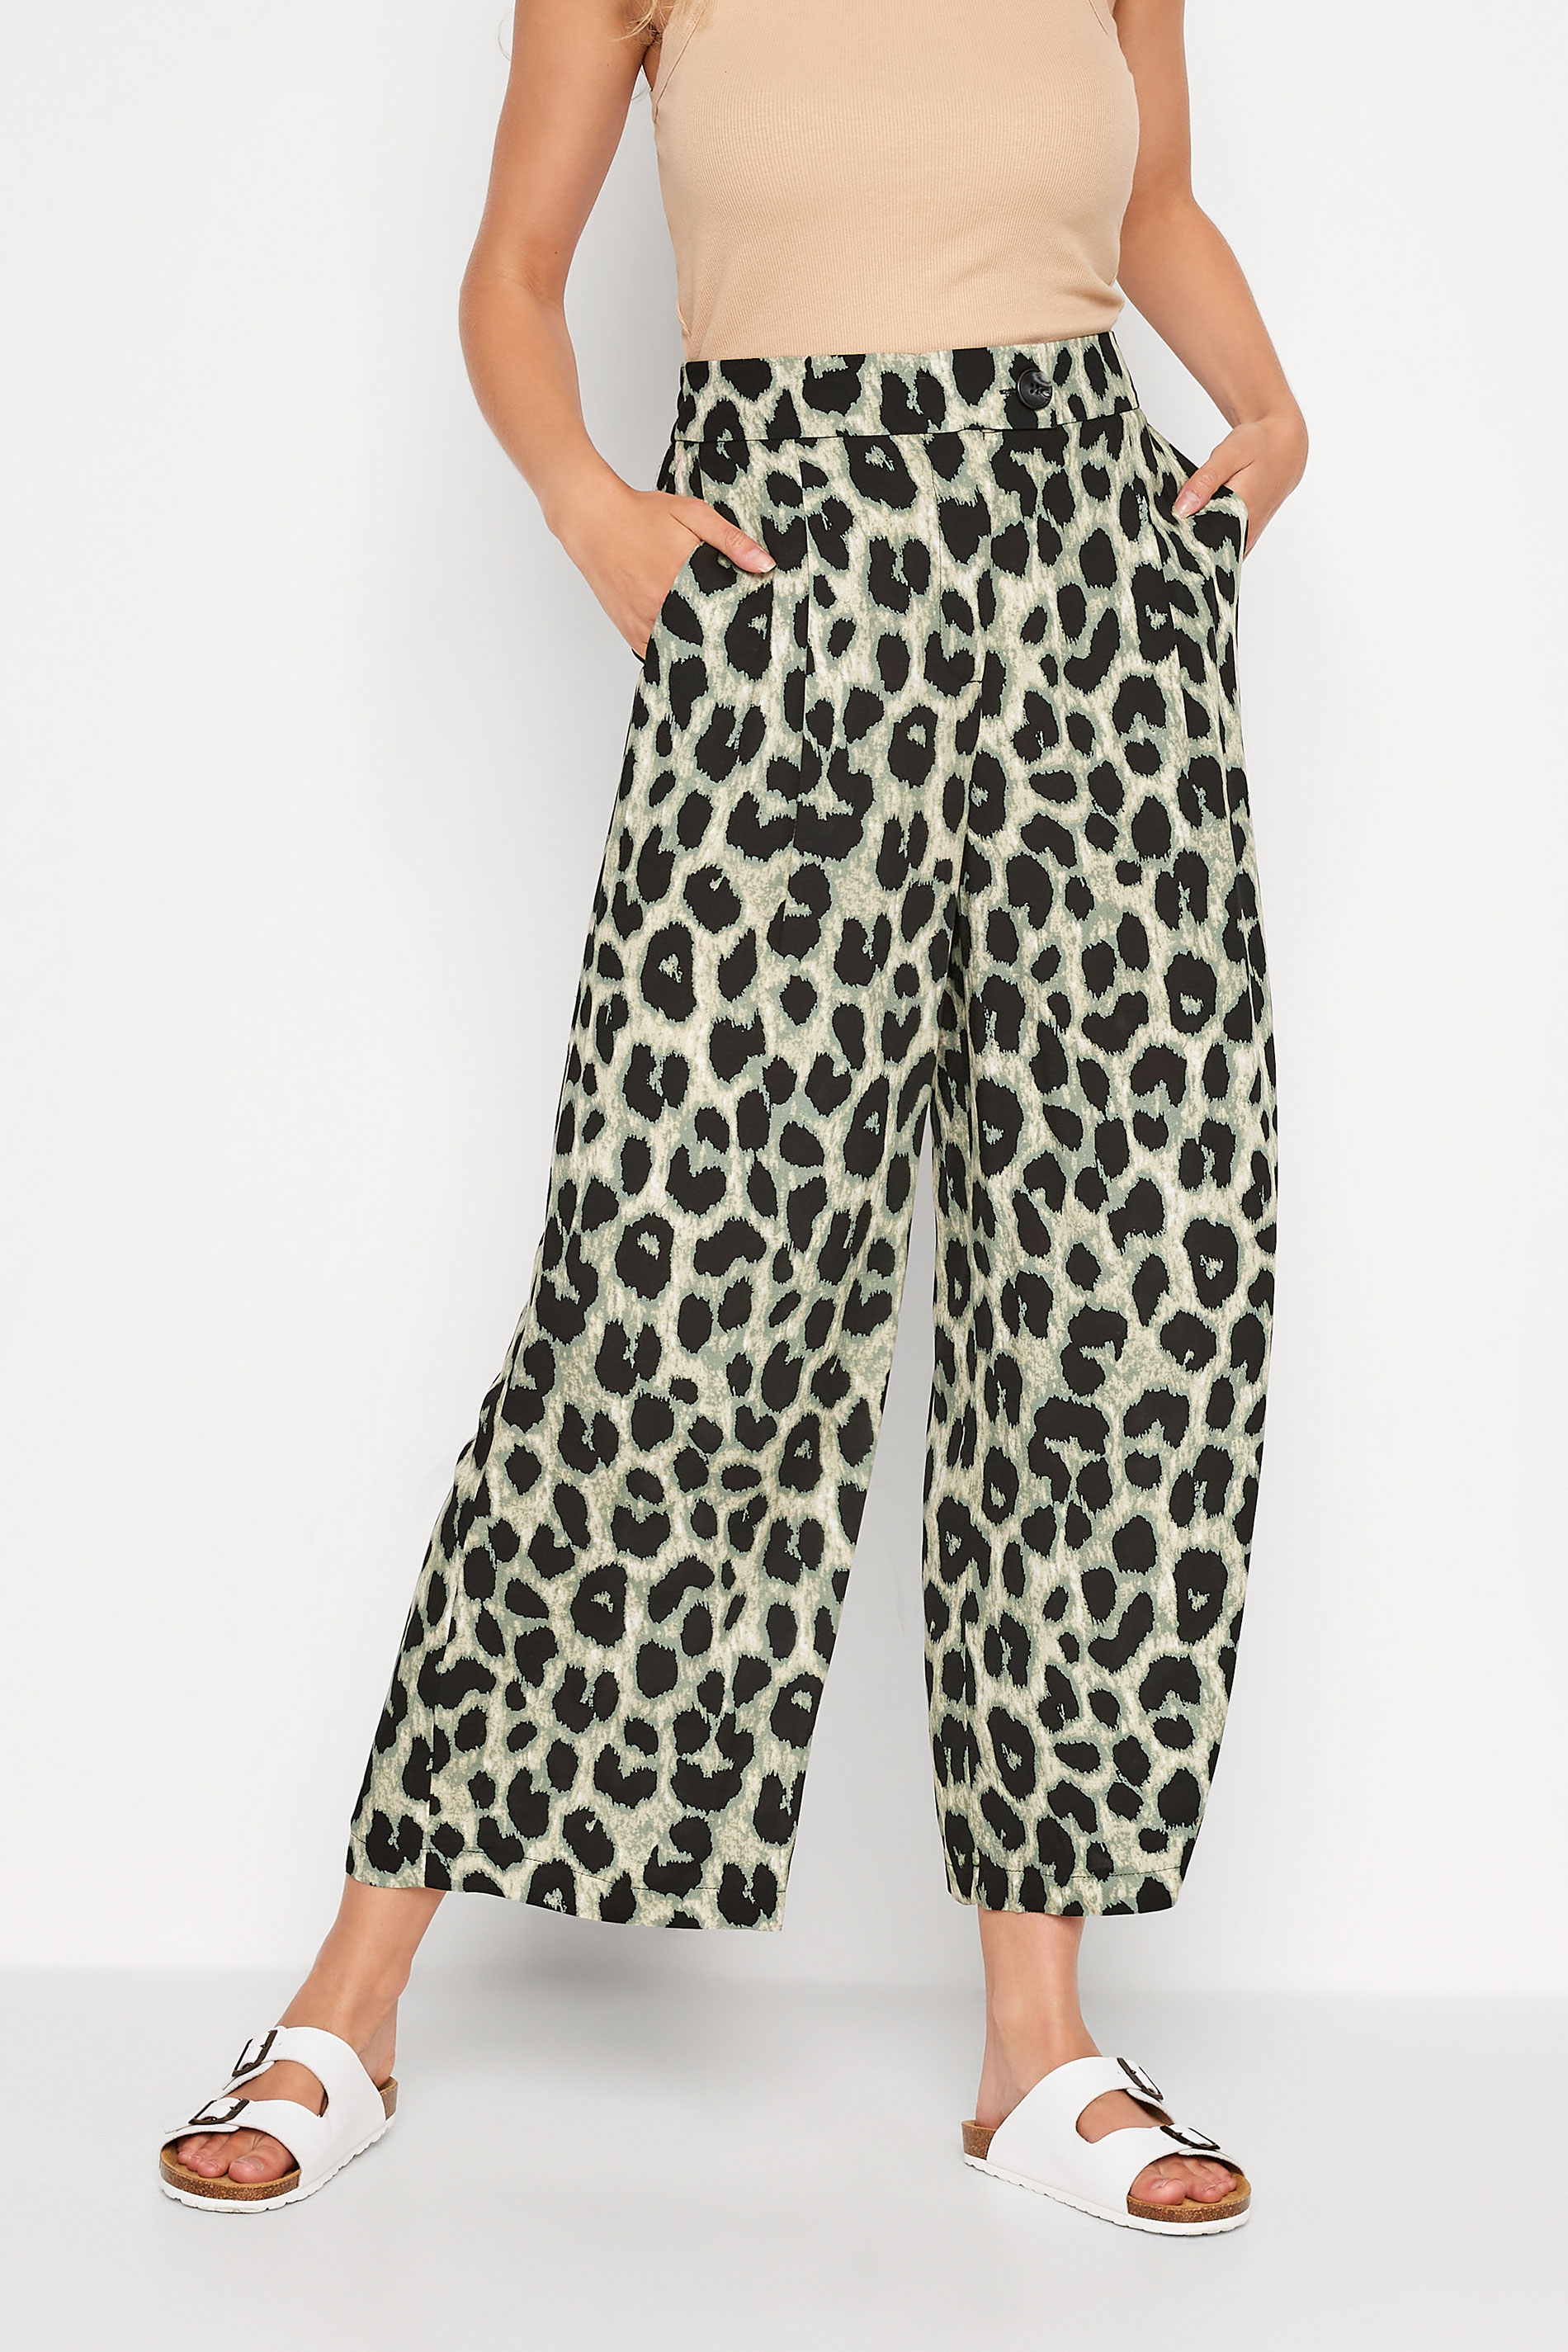 LTS Tall Women's Black Leopard Print Cropped Trousers | Long Tall Sally  1